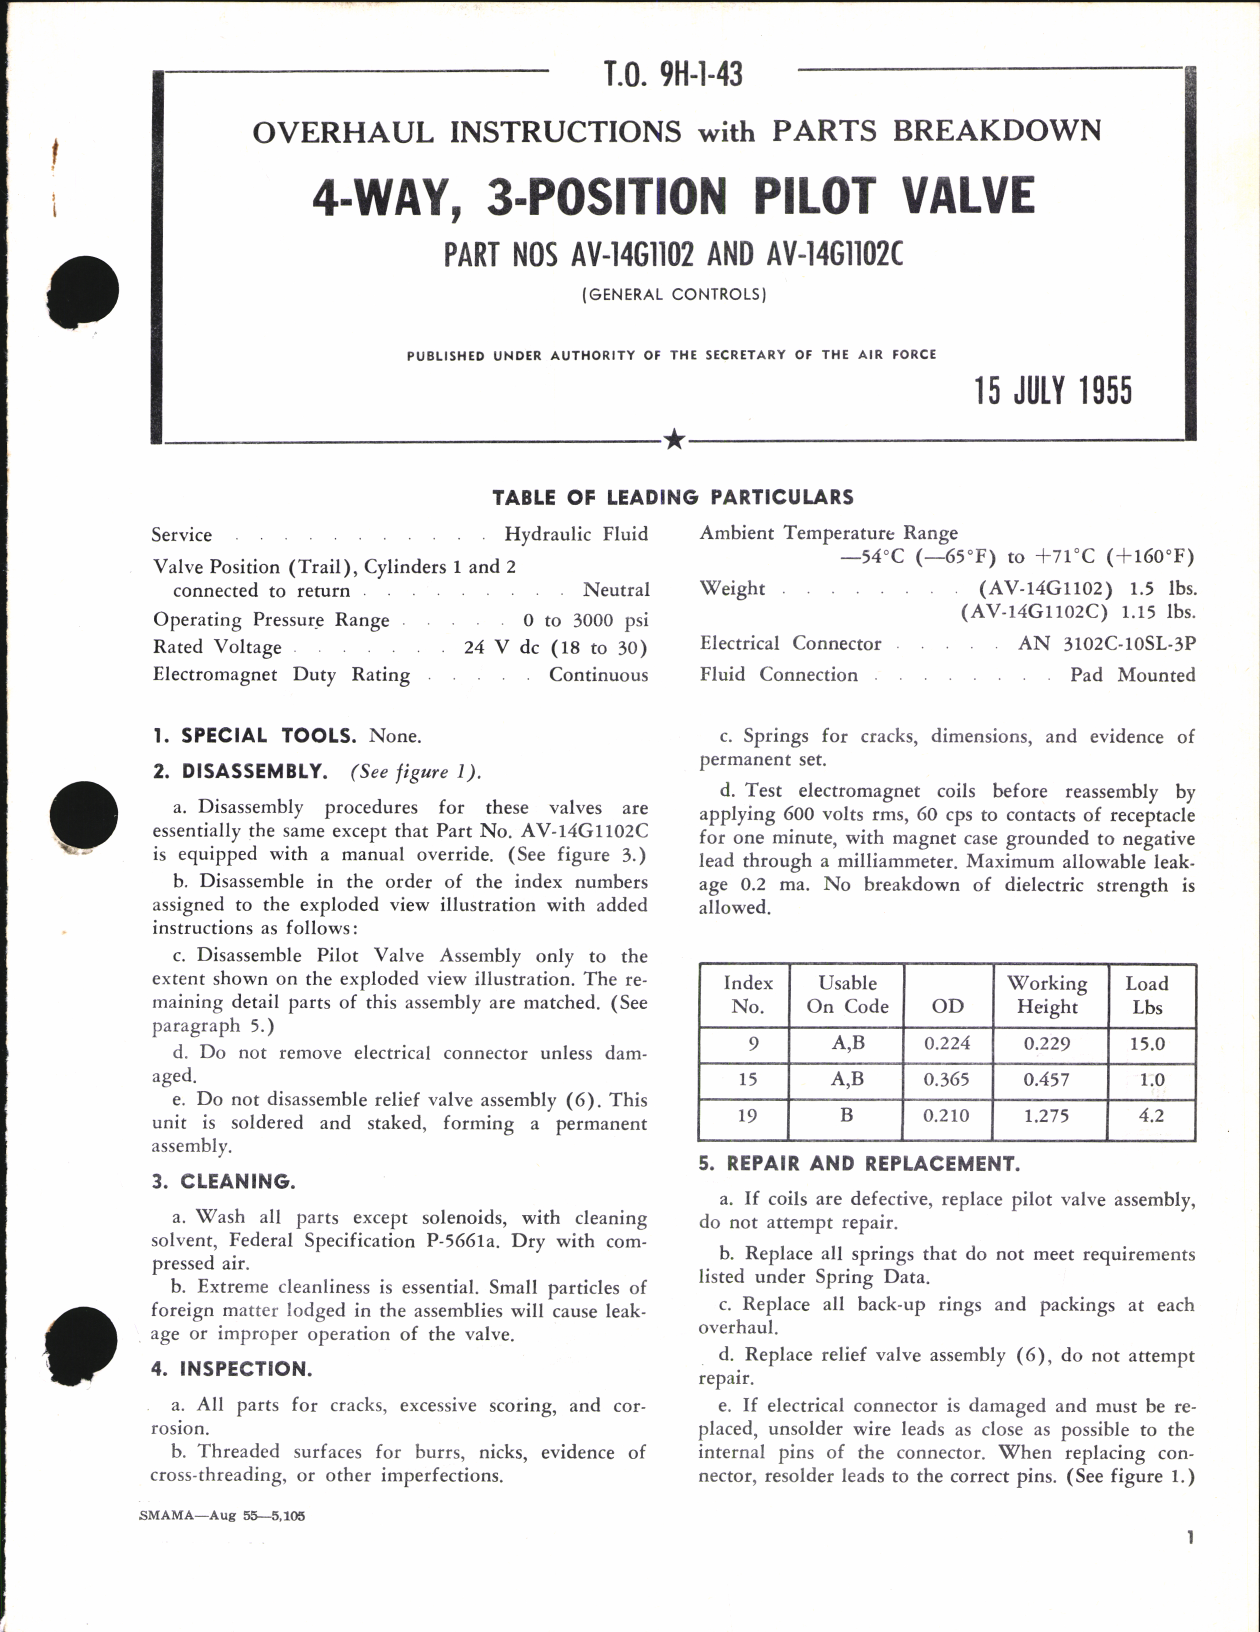 Sample page 1 from AirCorps Library document: Overhaul Instructions with Parts Breakdown for 4-Way. 3-Position Pilot Valve